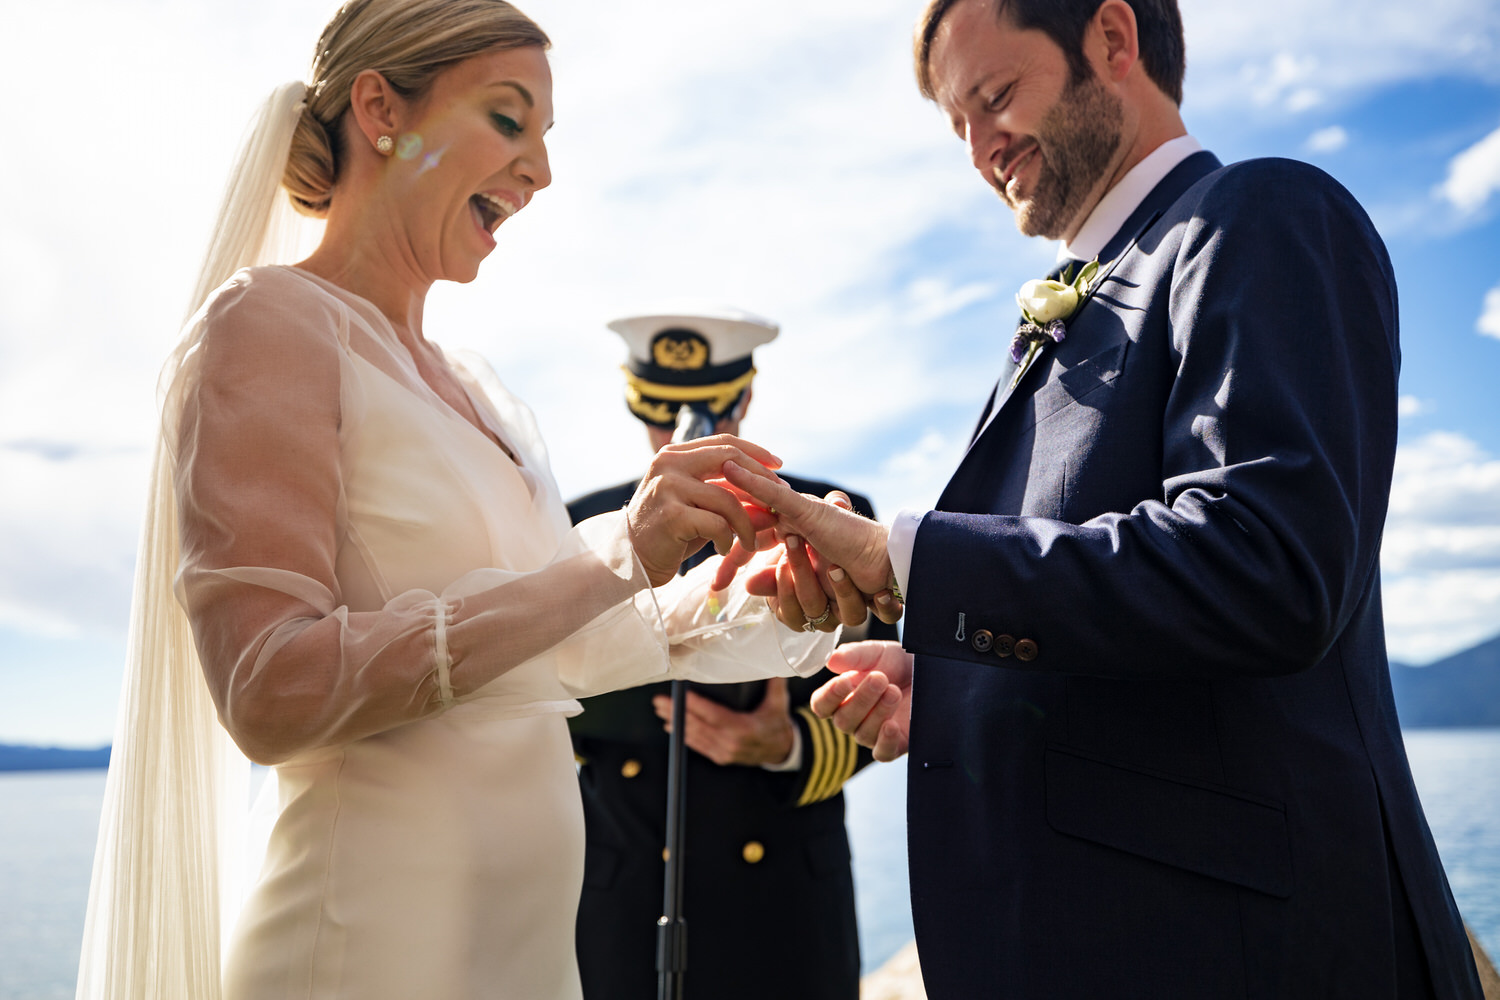 Low angle view of the bride placing a wedding ring on the groom's finger with Lake Tahoe in the background.